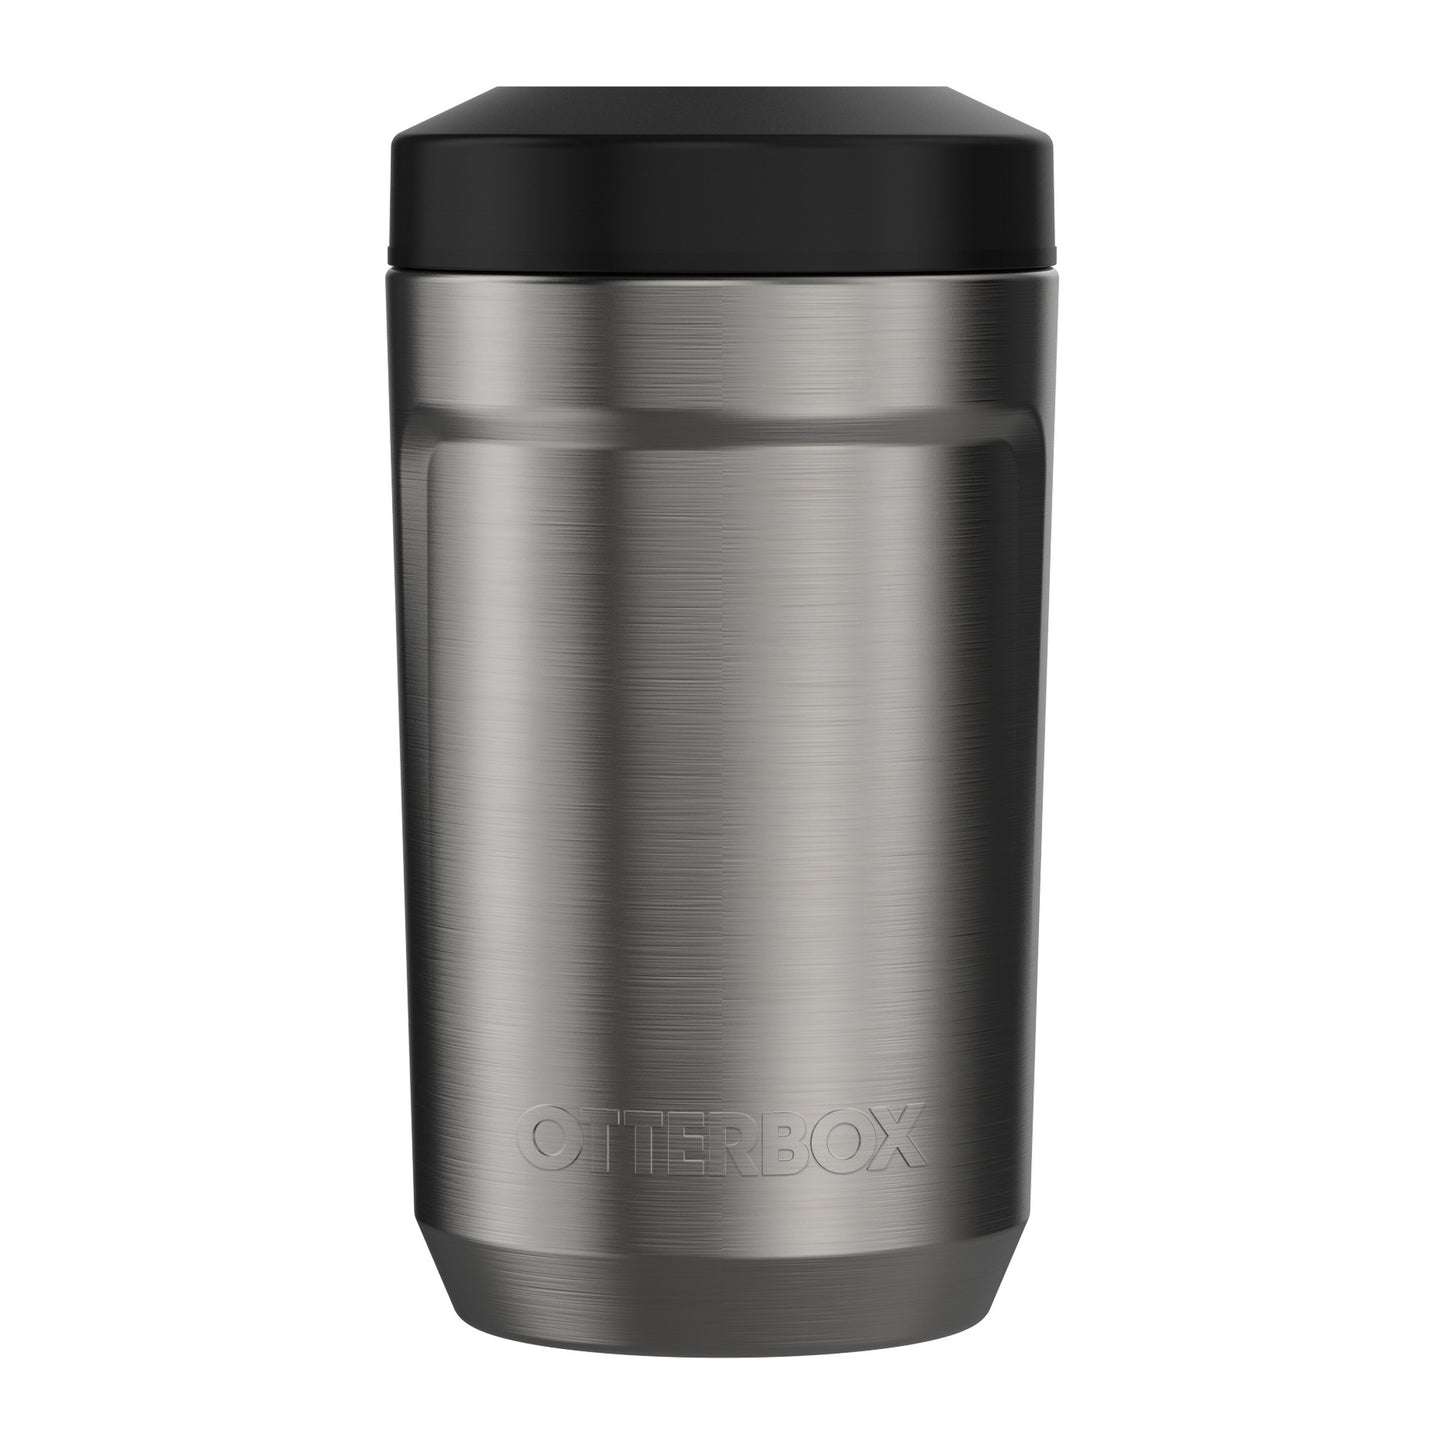 Otterbox Elevation Stainless Steel Can Cooler - Clear - 15-11850